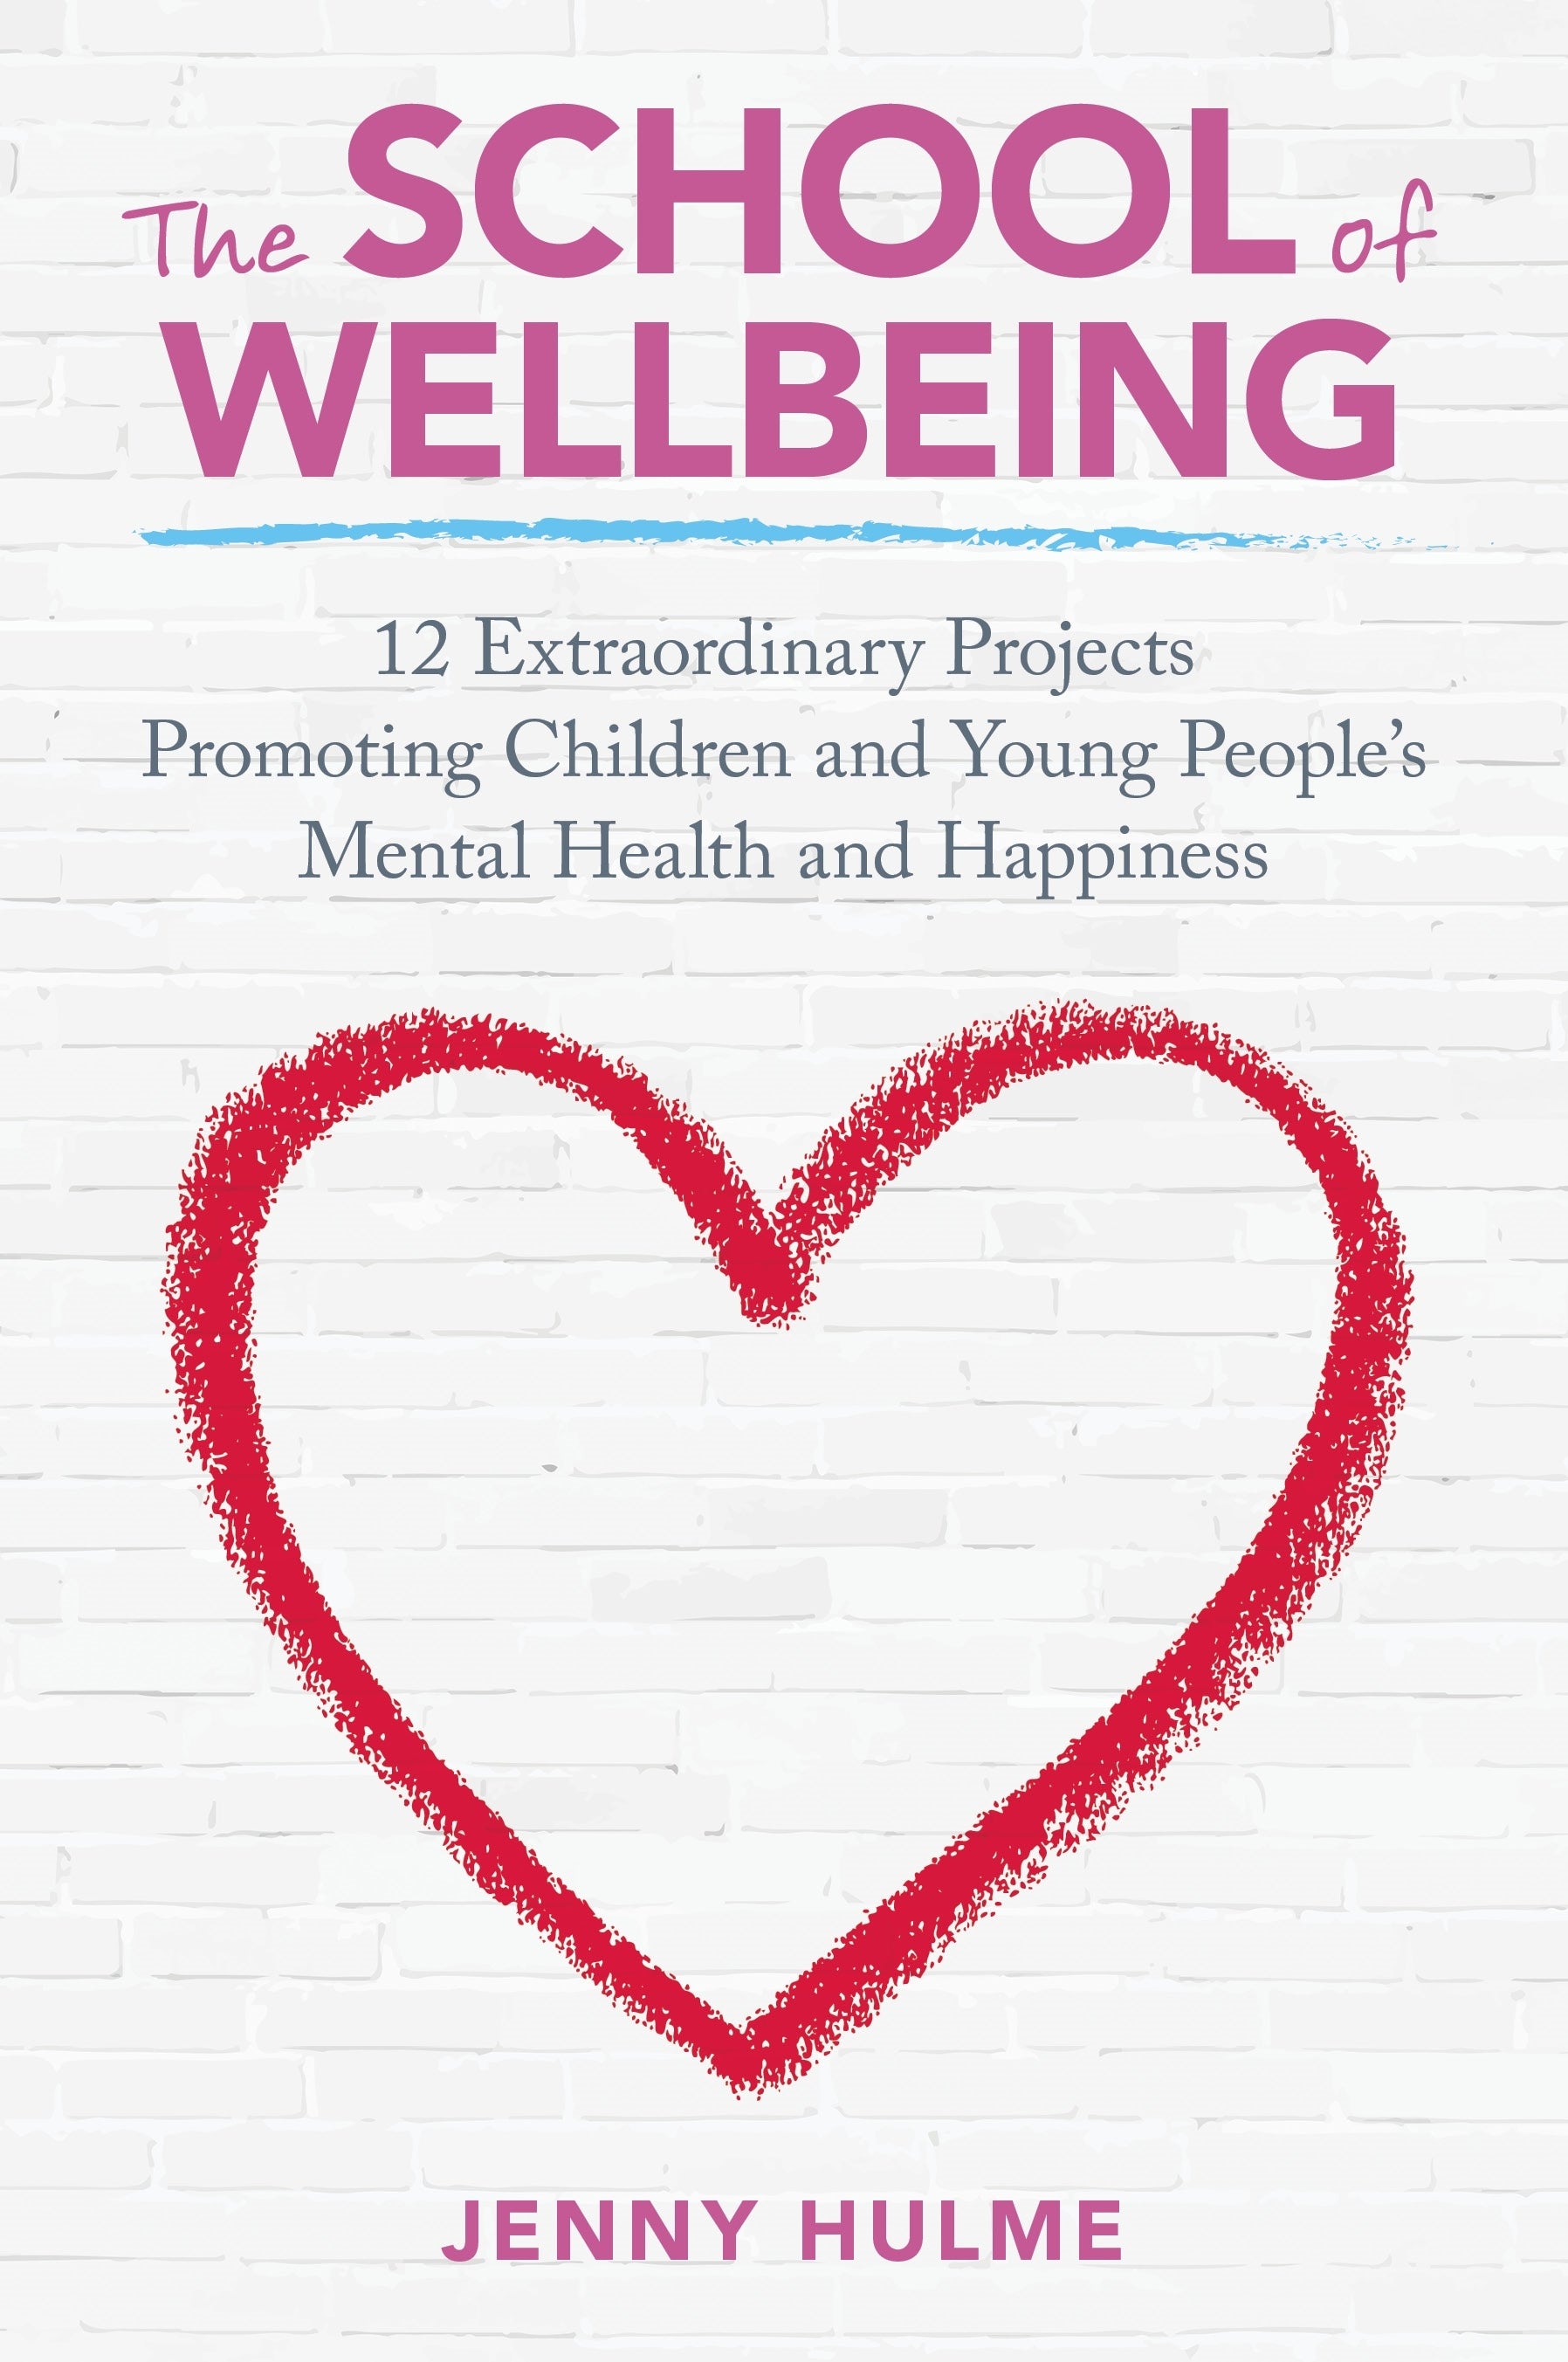 The School of Wellbeing by Jenny Hulme